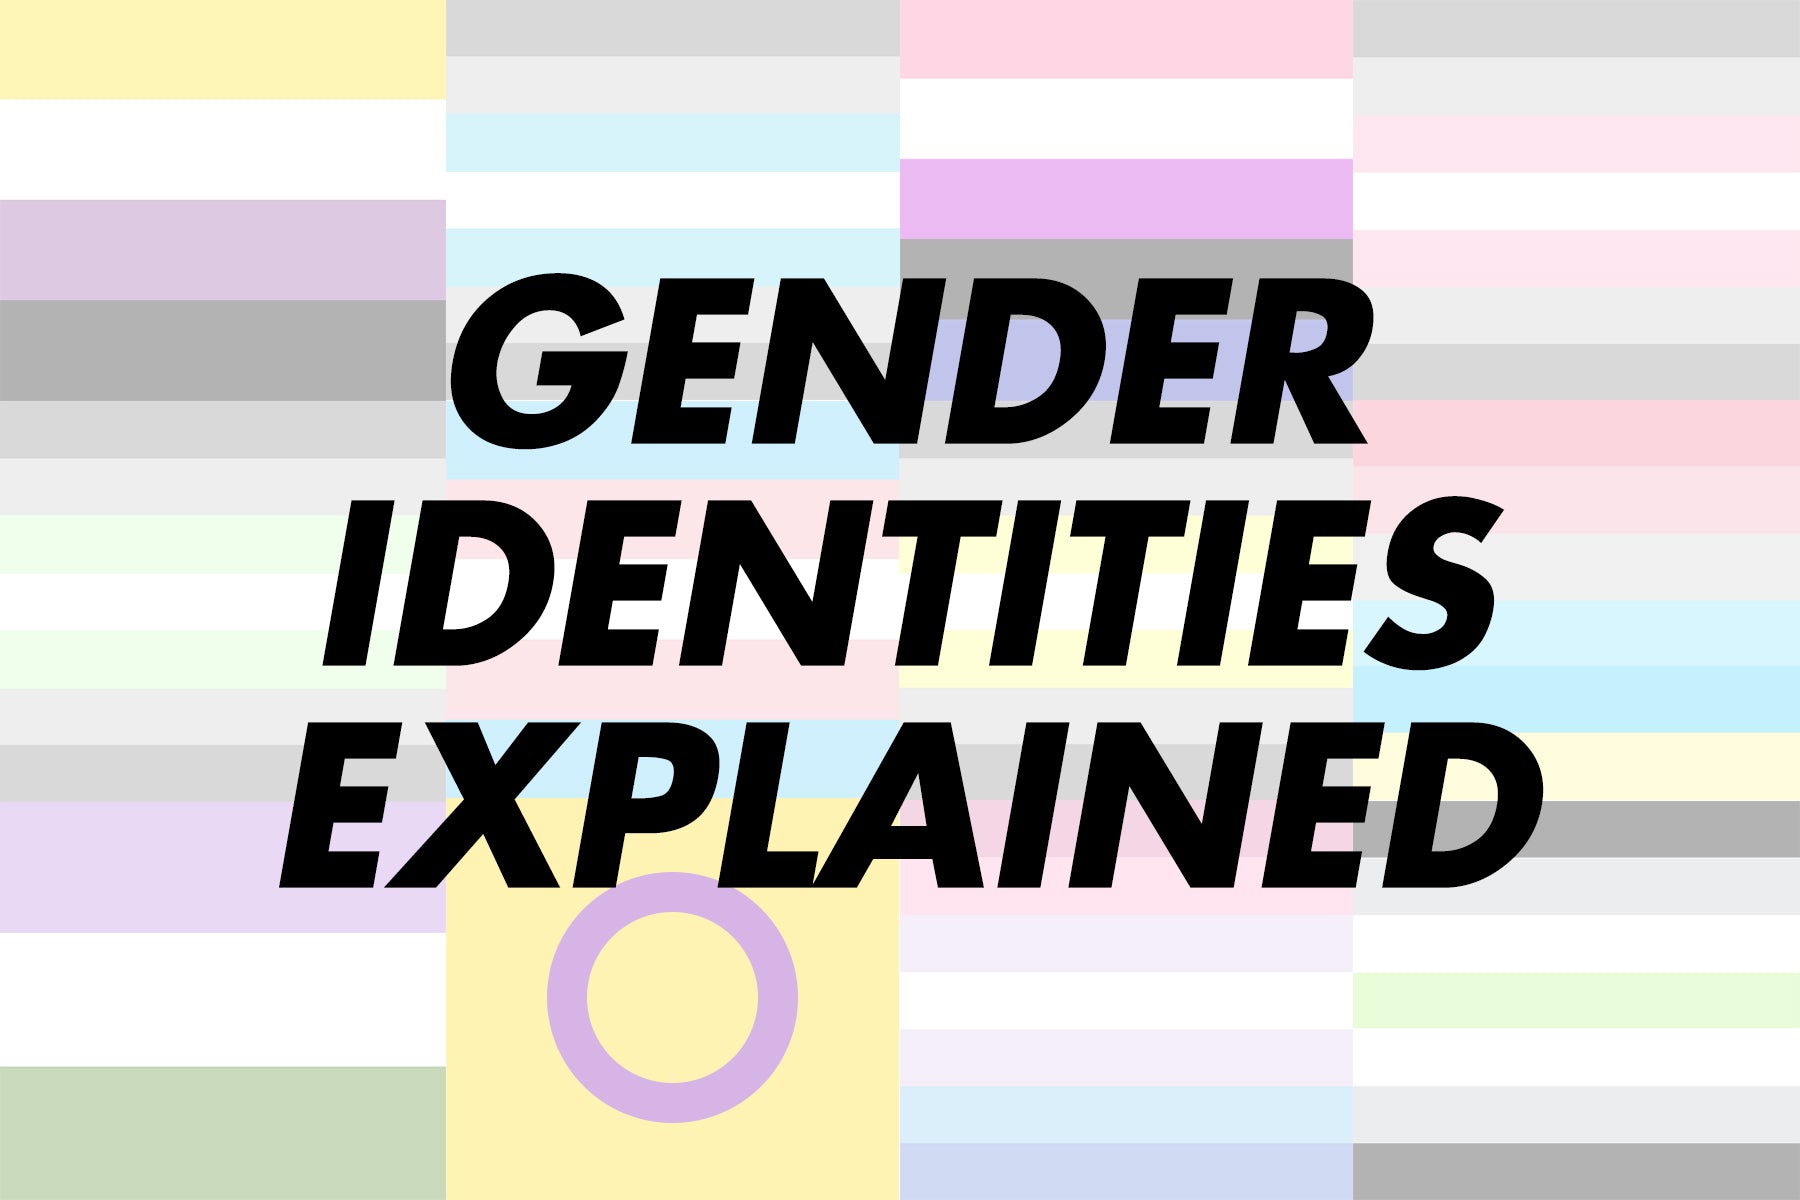 Glossary of Must-Know Gender Identity Terms